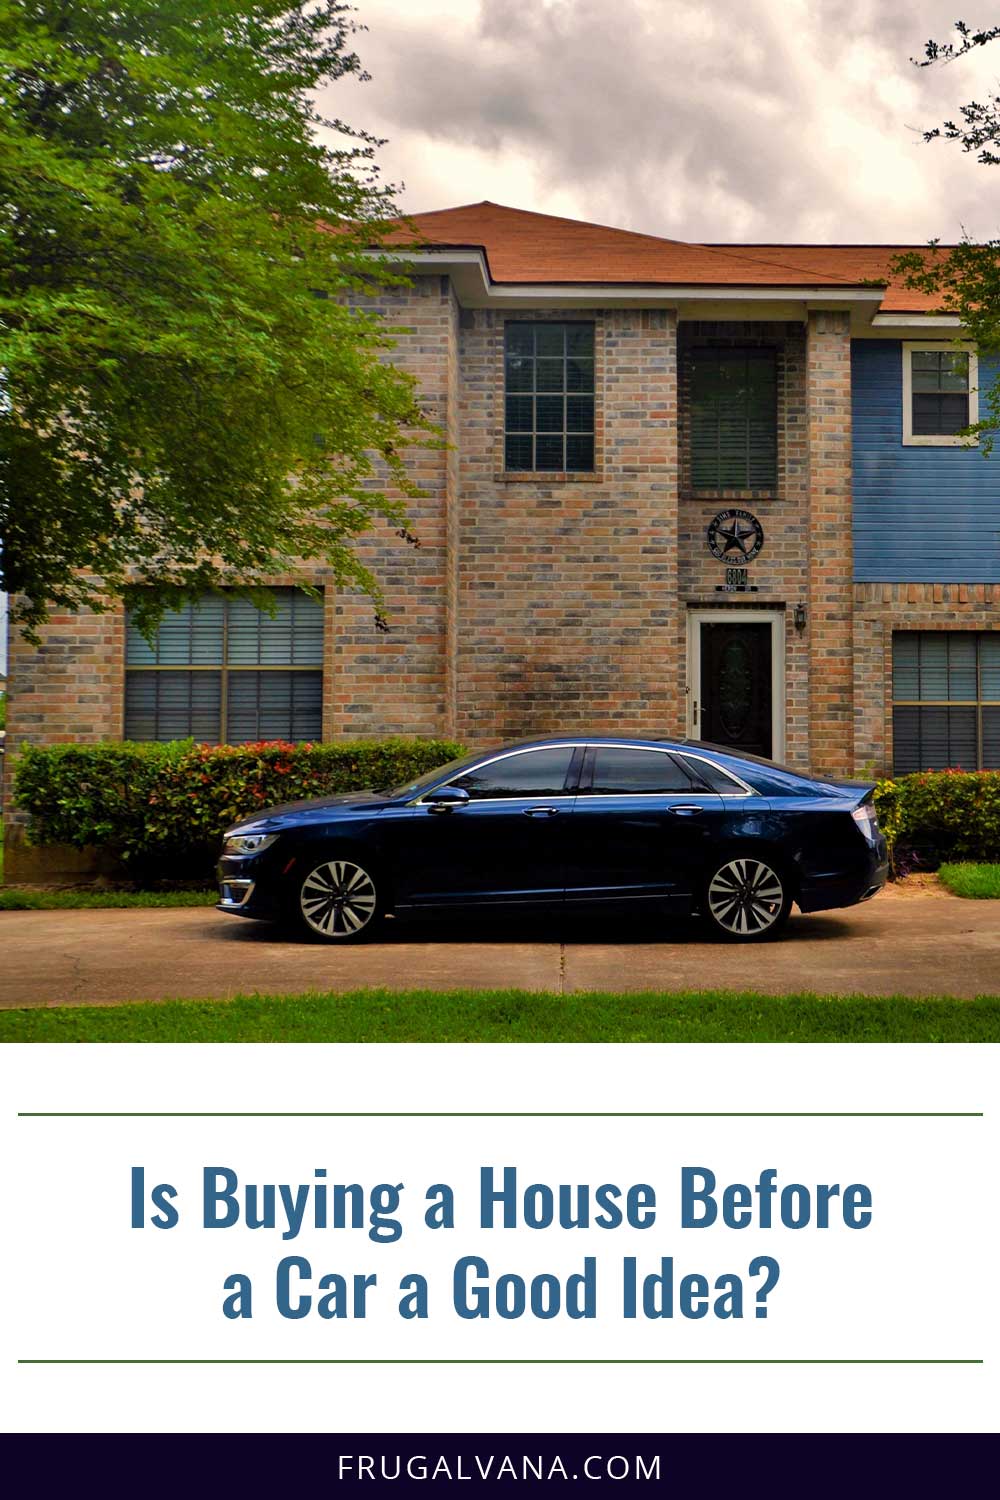 Is Buying a House Before a Car a Good Idea?